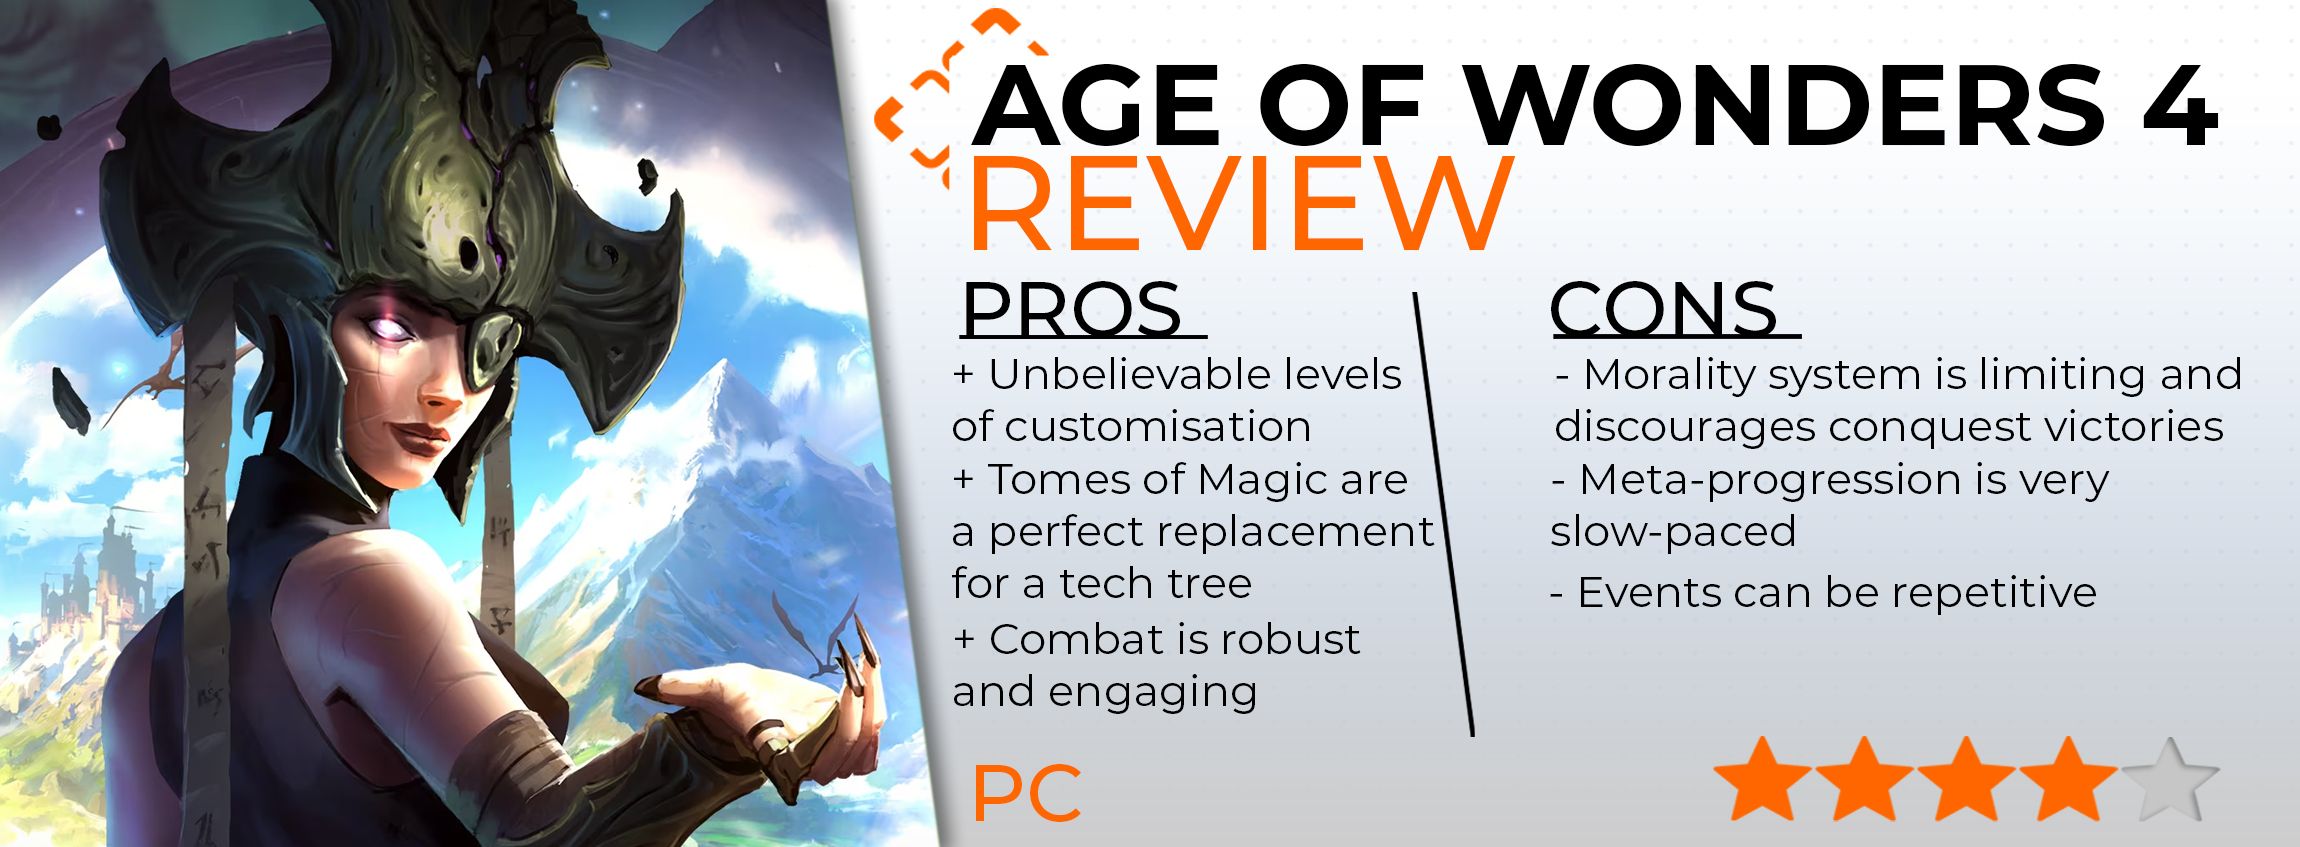 Age of Wonders 4 review